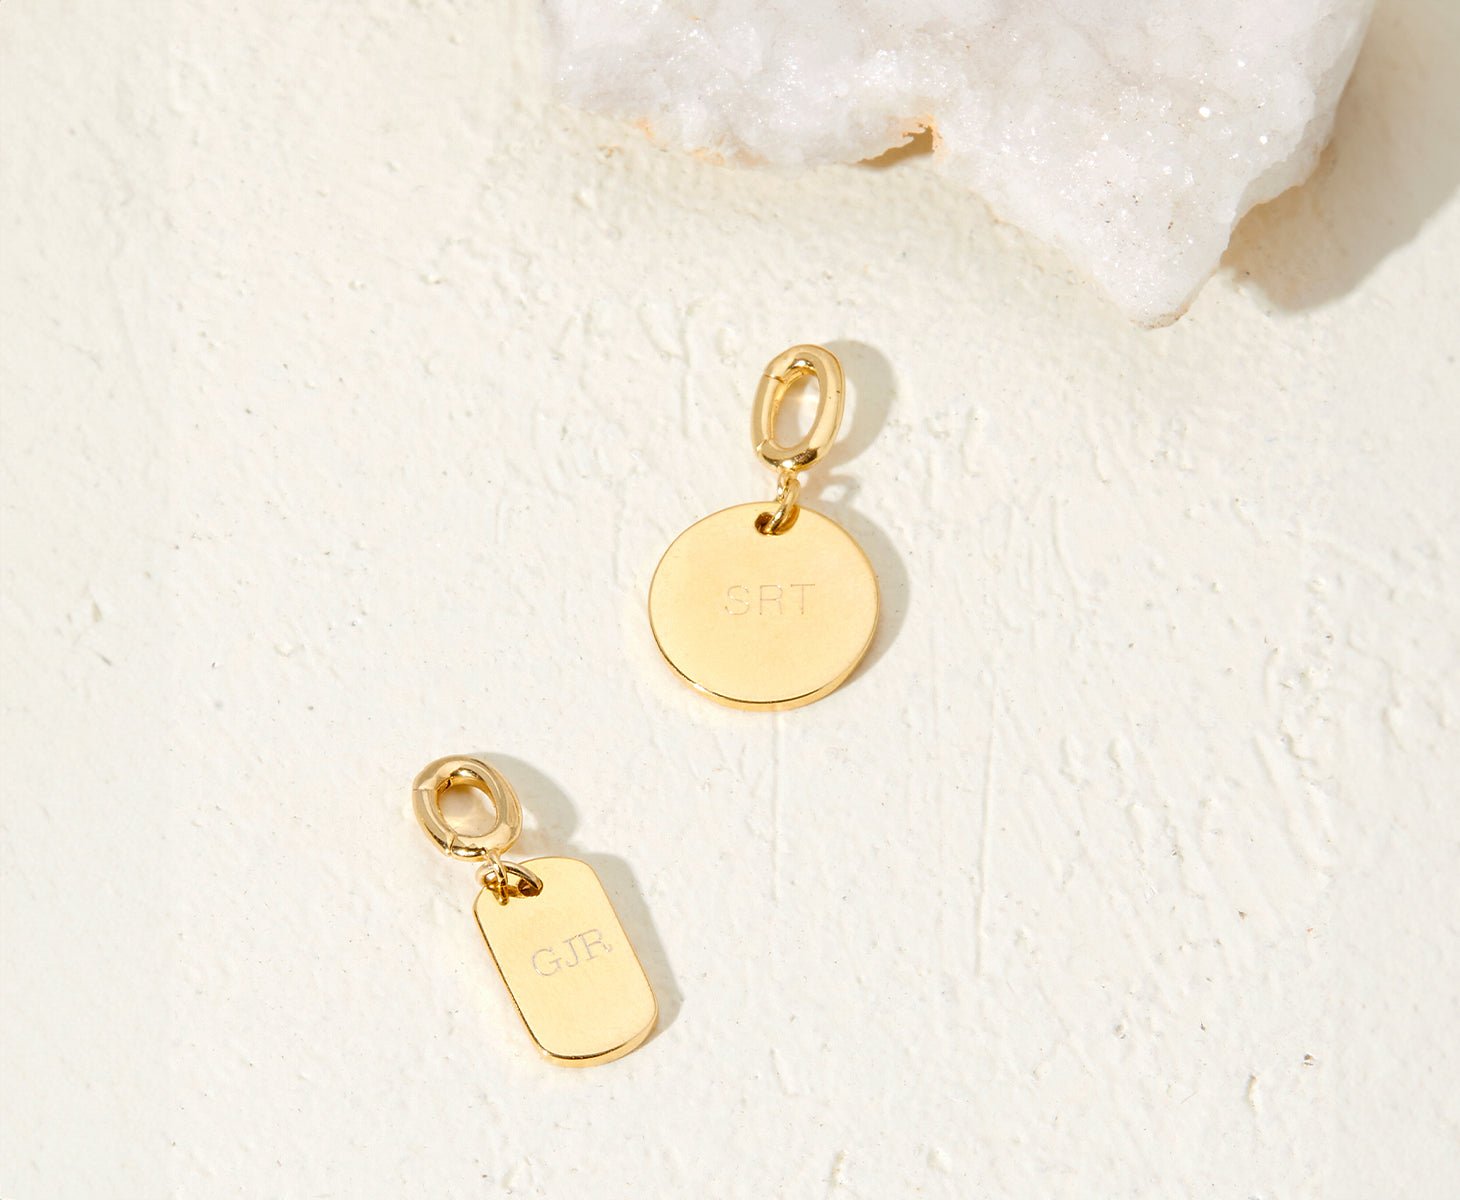 Two gold charms with initials engraved